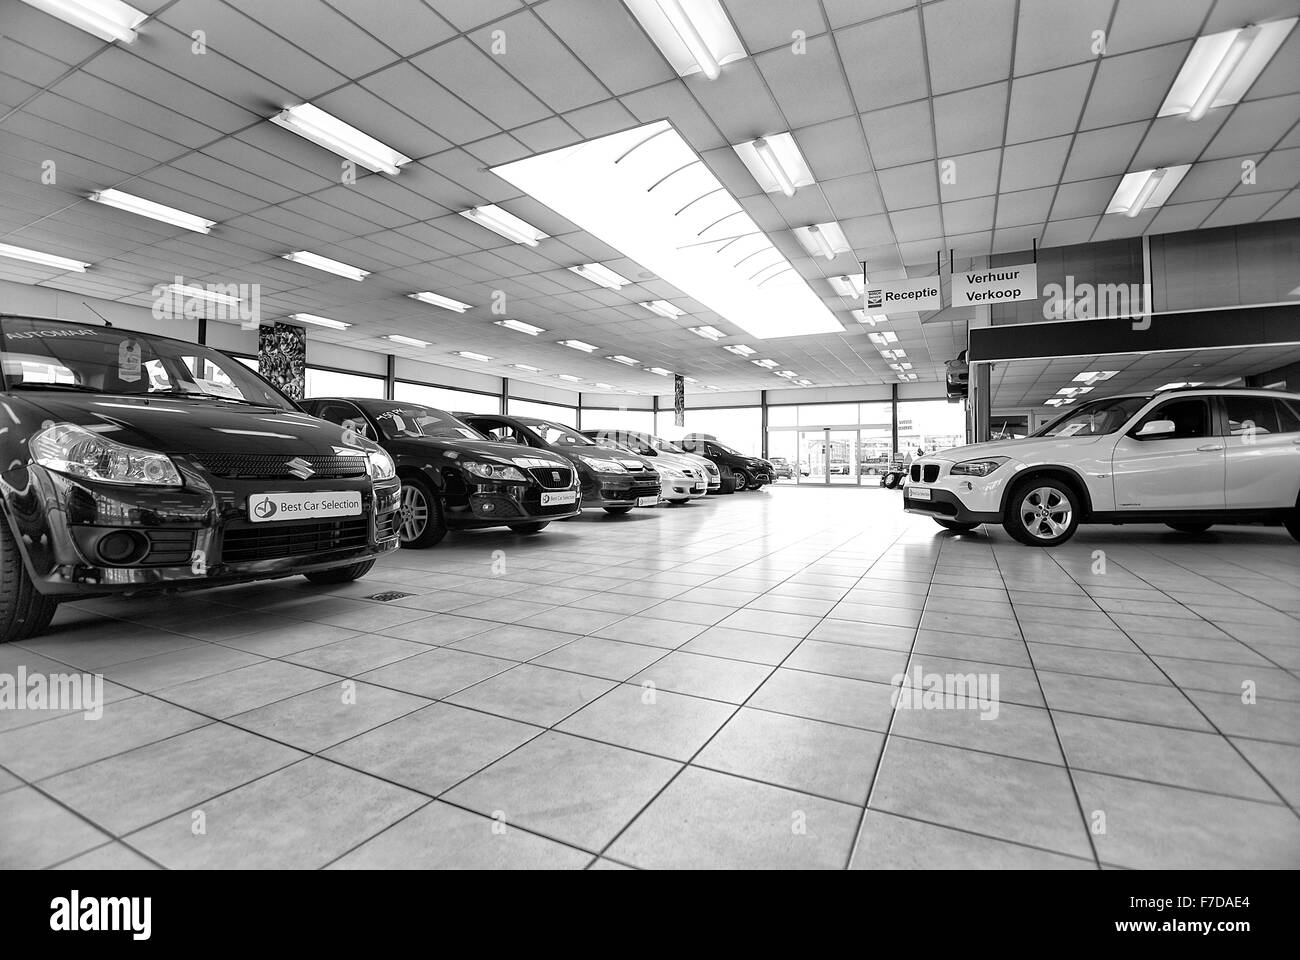 Used cars in a showroom photograph in black and white Stock Photo